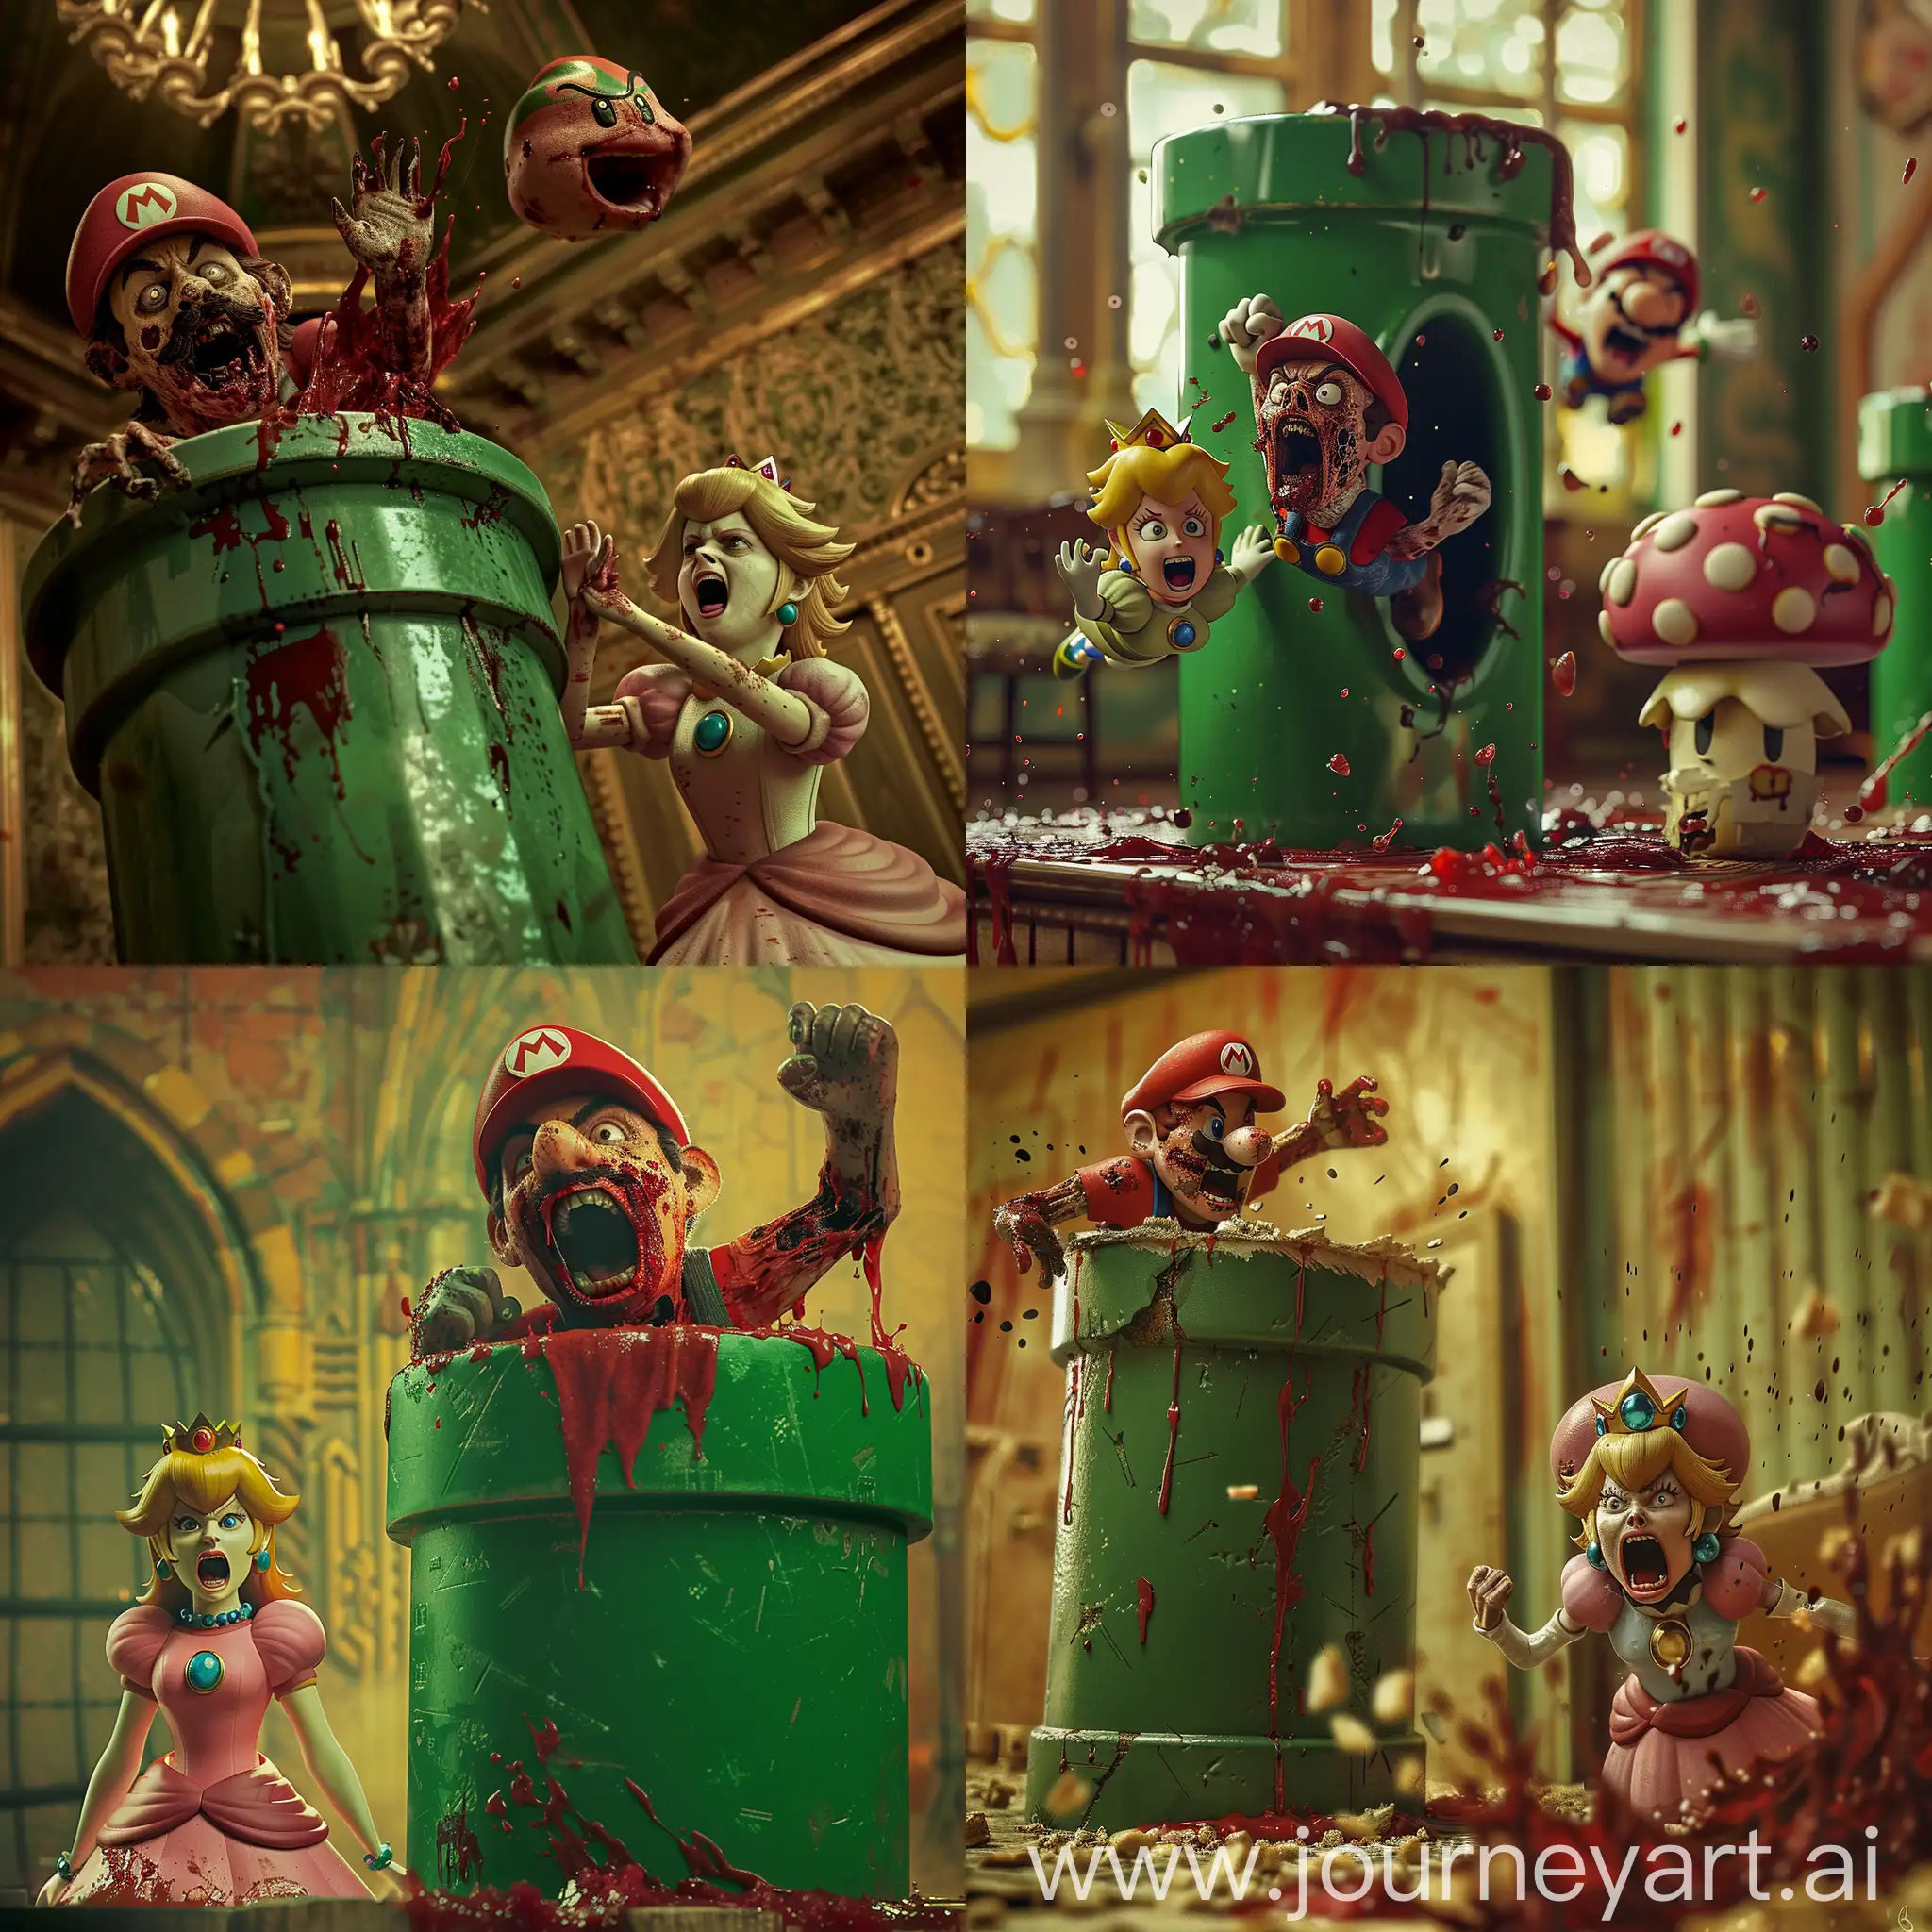 Background: Mario the zombie climbs out of green cylinder, covered in blood. Foreground: Princess Peach Toadstool terrified, scream and cry, the interior of the castle, grunge style effect, photo style inspired by 2002 movie The Bell, photorealistic.